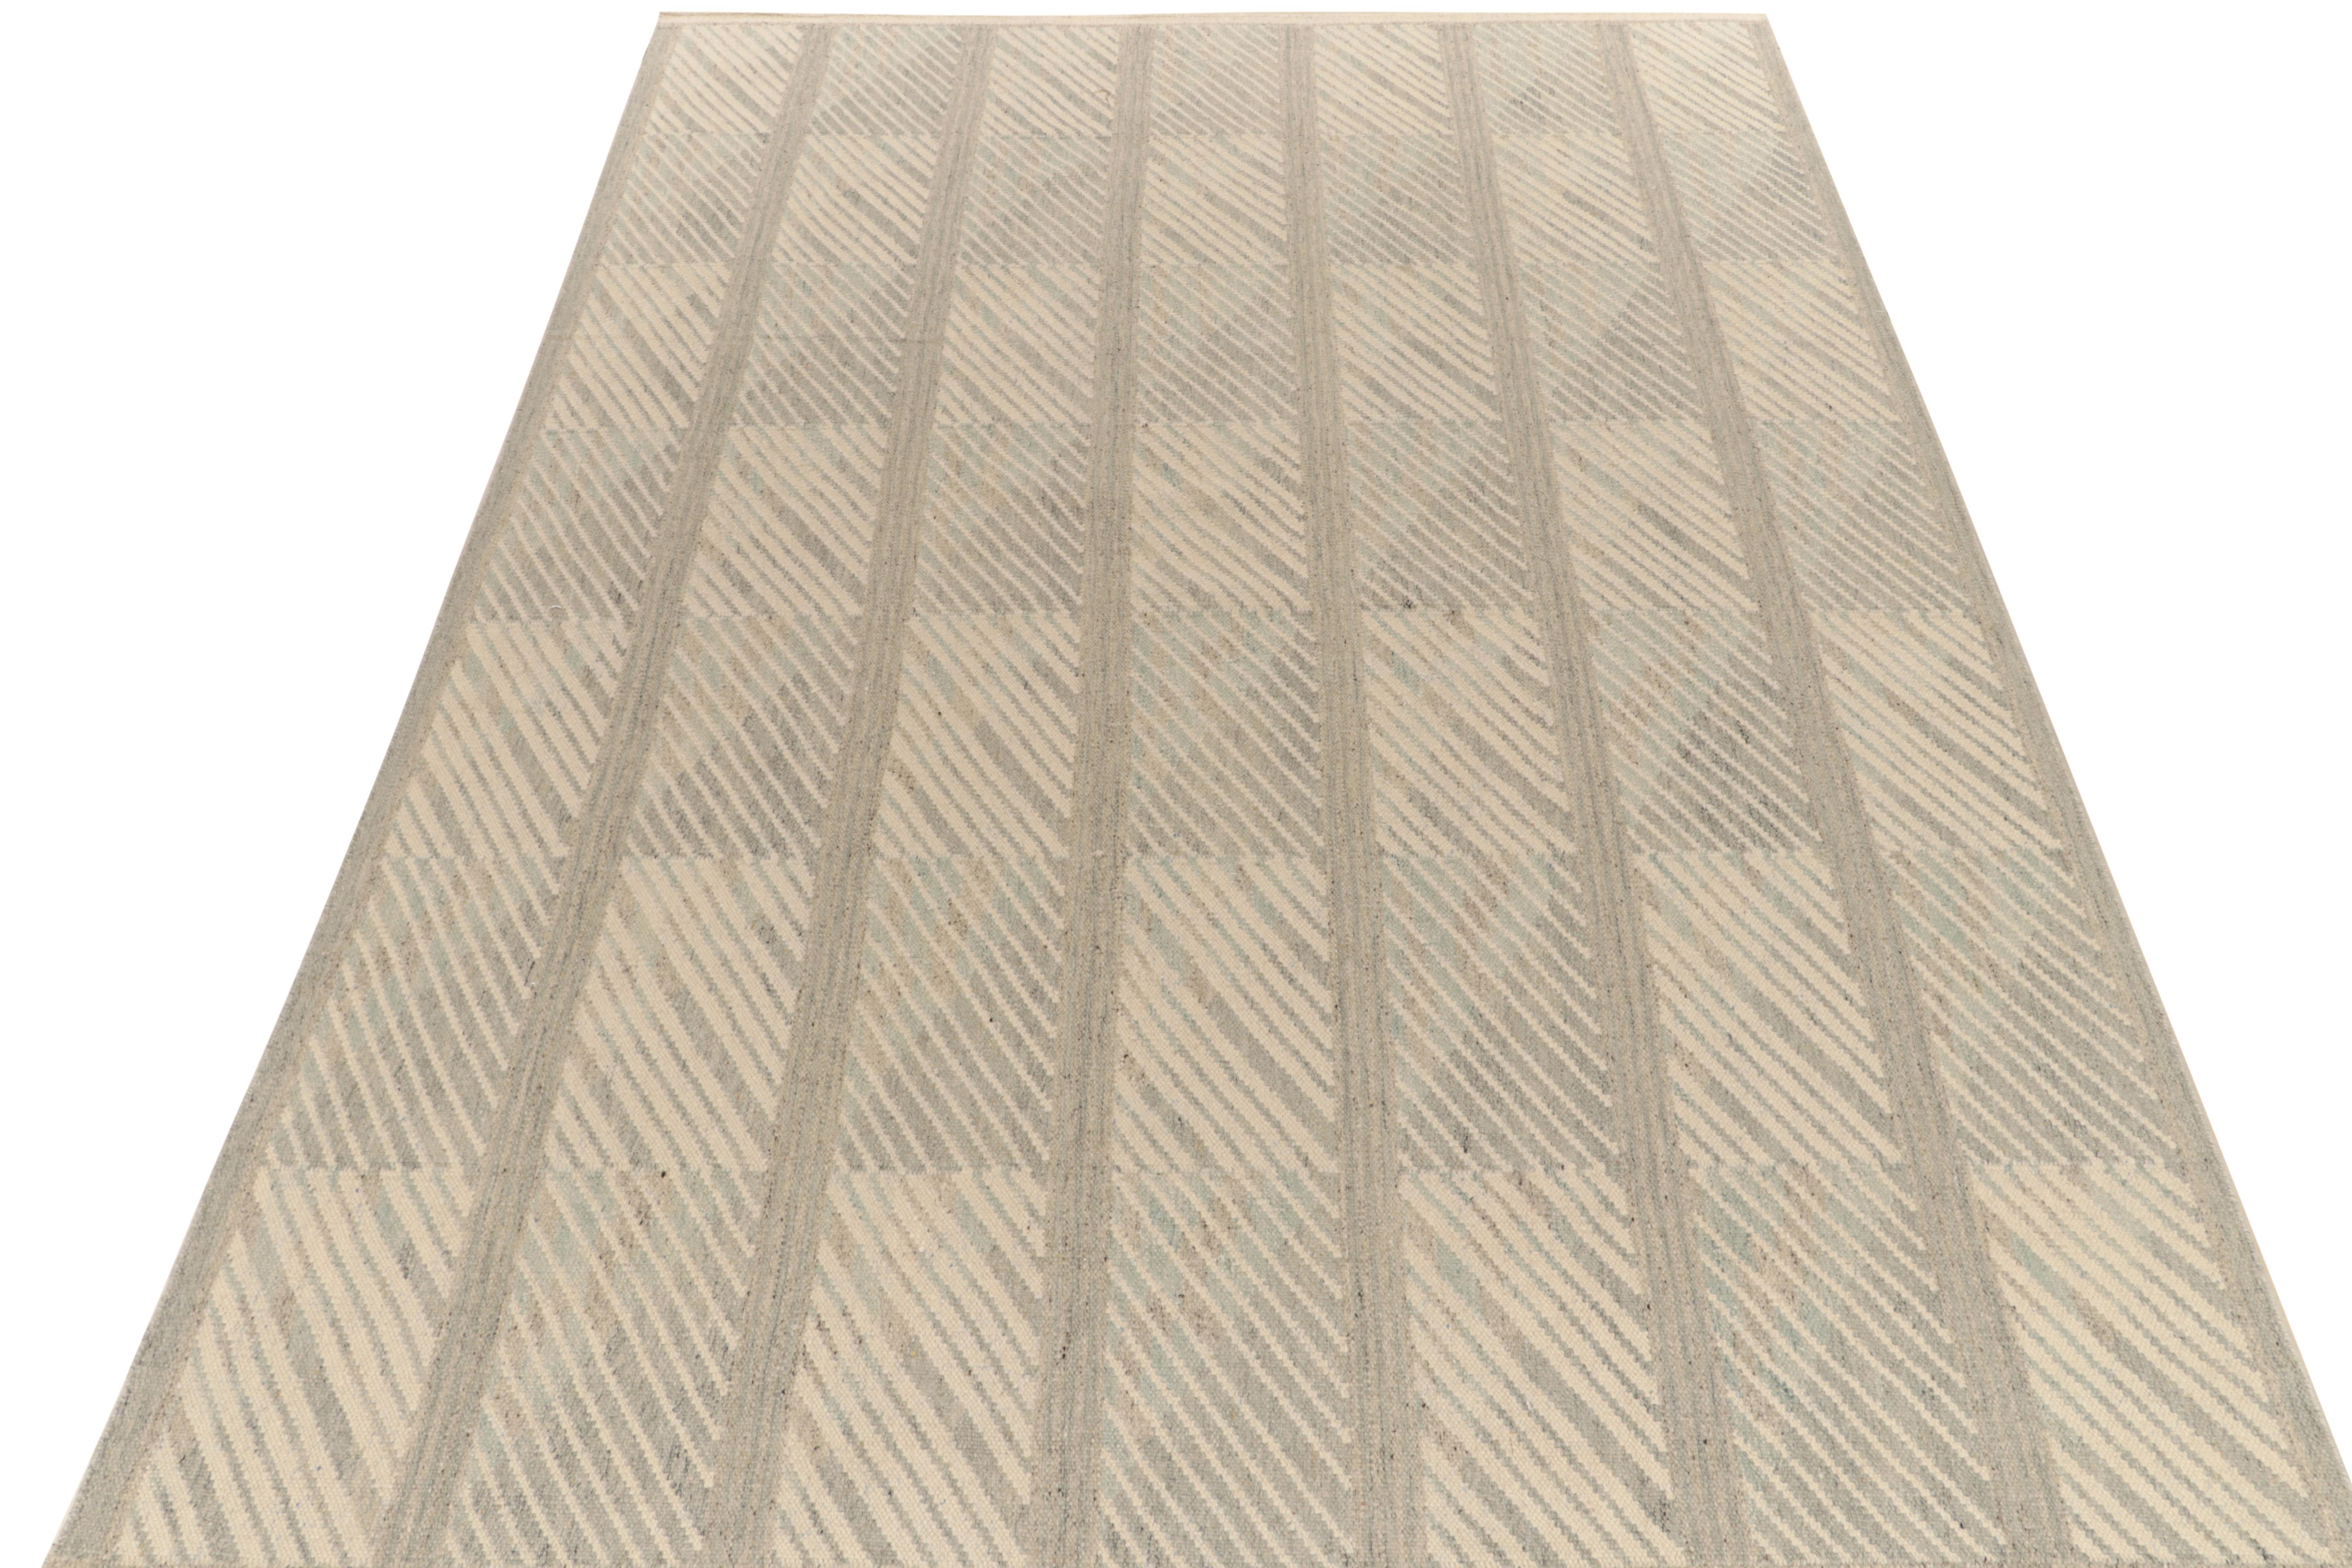 Handwoven in fine quality wool, a 10x14 Kilim joining our award-winning Scandinavian flat weave textures. The contemporary rug features a sharp geometric Deco pattern with striations in gray & beige for reflective, yet comfortable movement in fine